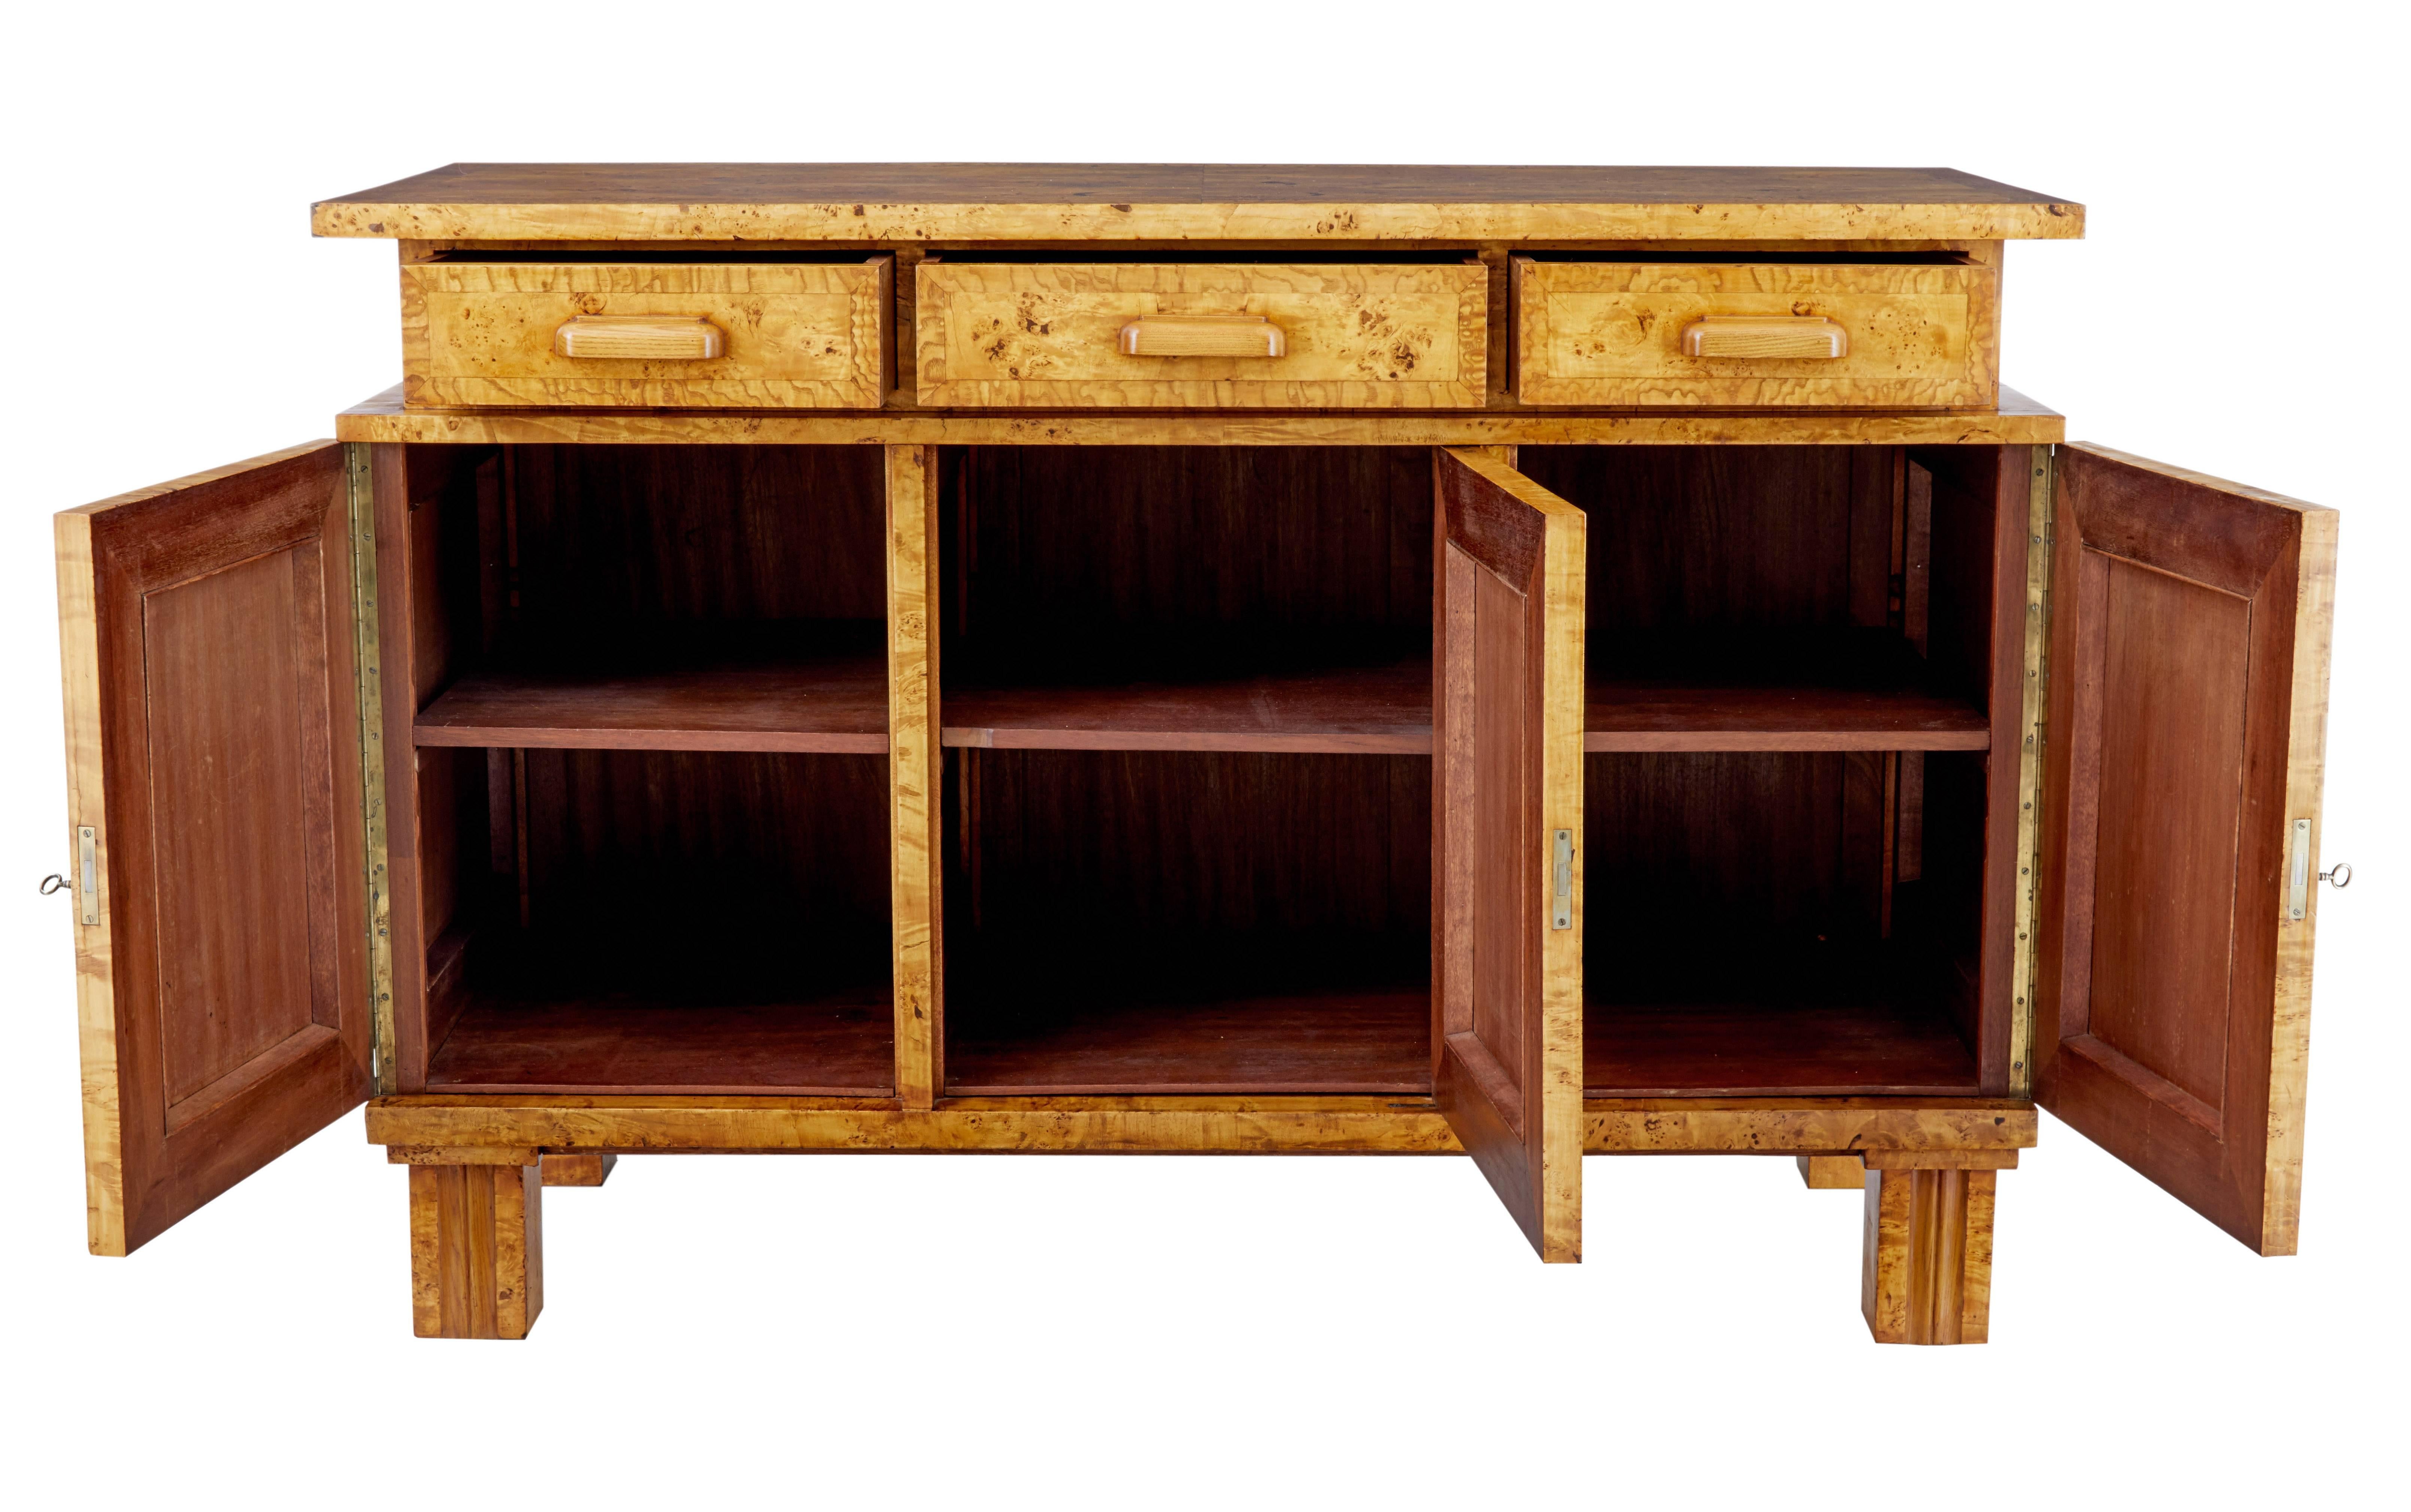 Stunning birch root sideboard of large proportions, circa 1910.

Over sailing cross banded top surface with three drawers directly below. Three single doors which open on the key to reveal a single drawer.

Standing on four straight fluted